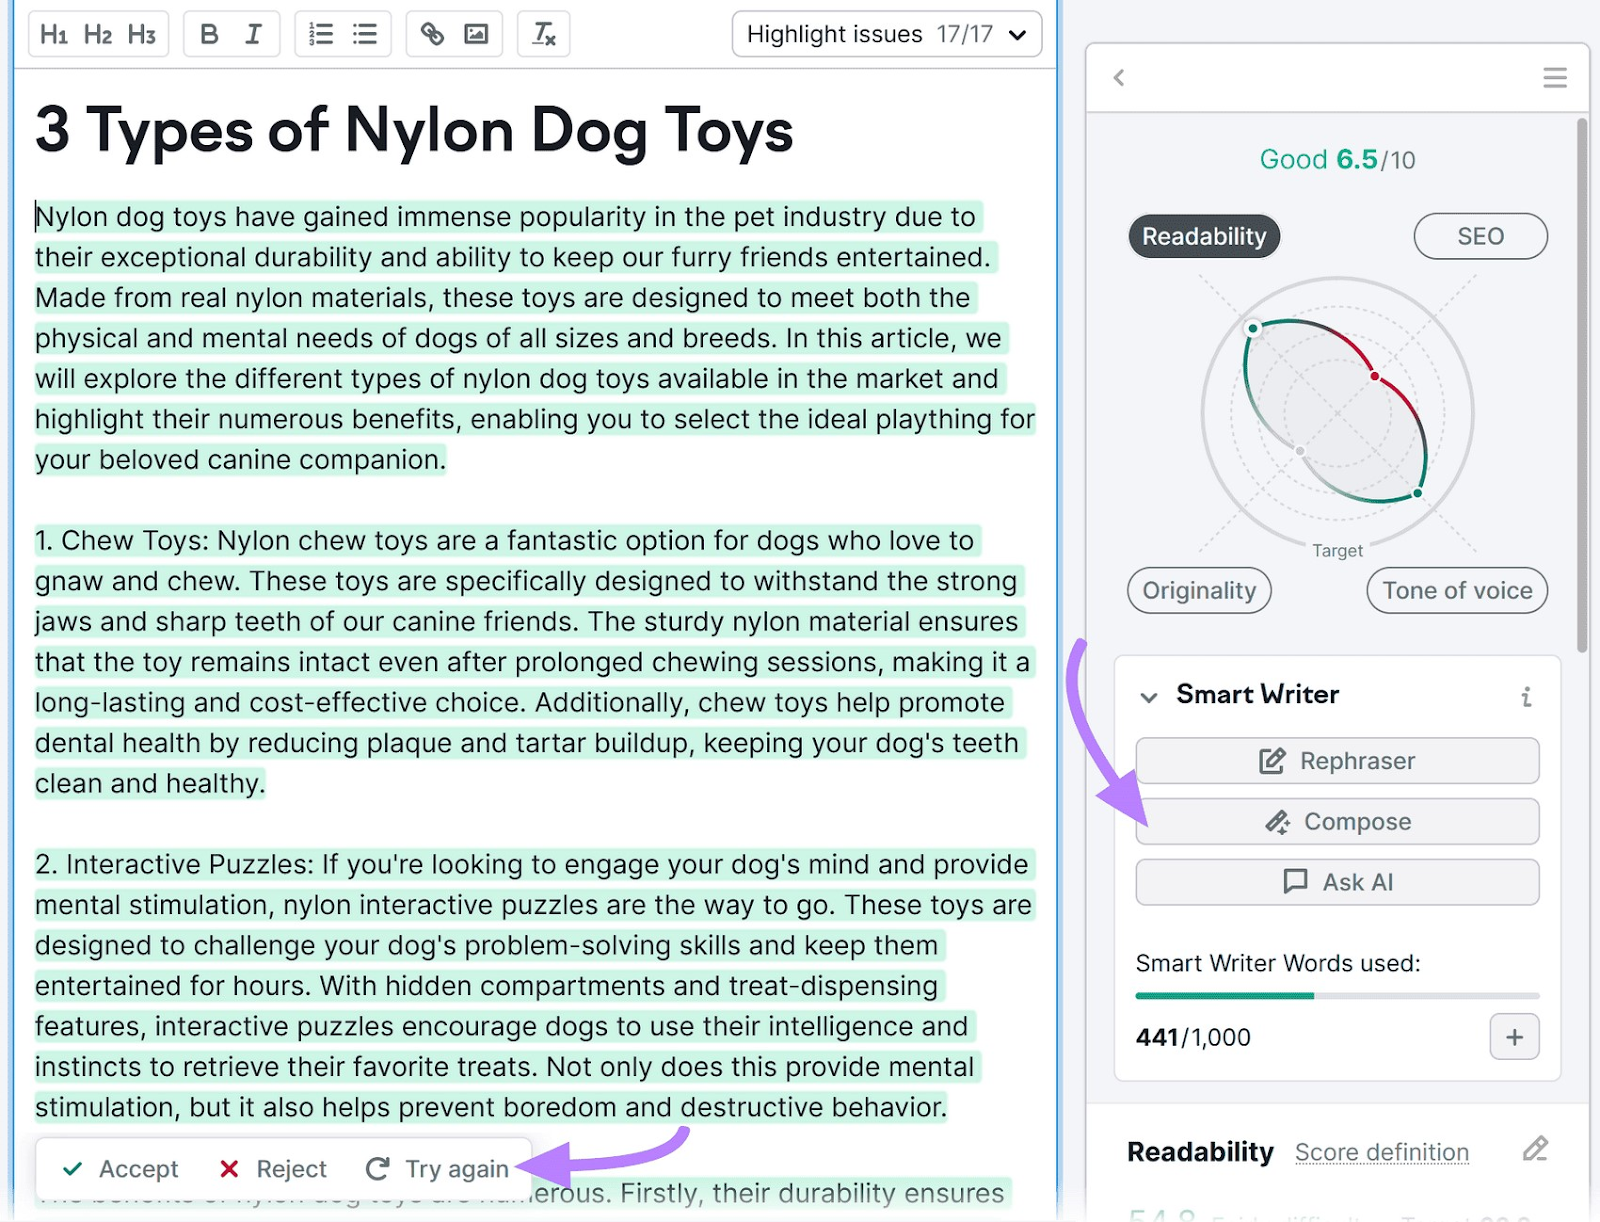 "3 Types of Nylon Dog Toys" draft in SEO Writing Assistant with "Compose" highlighted on the right